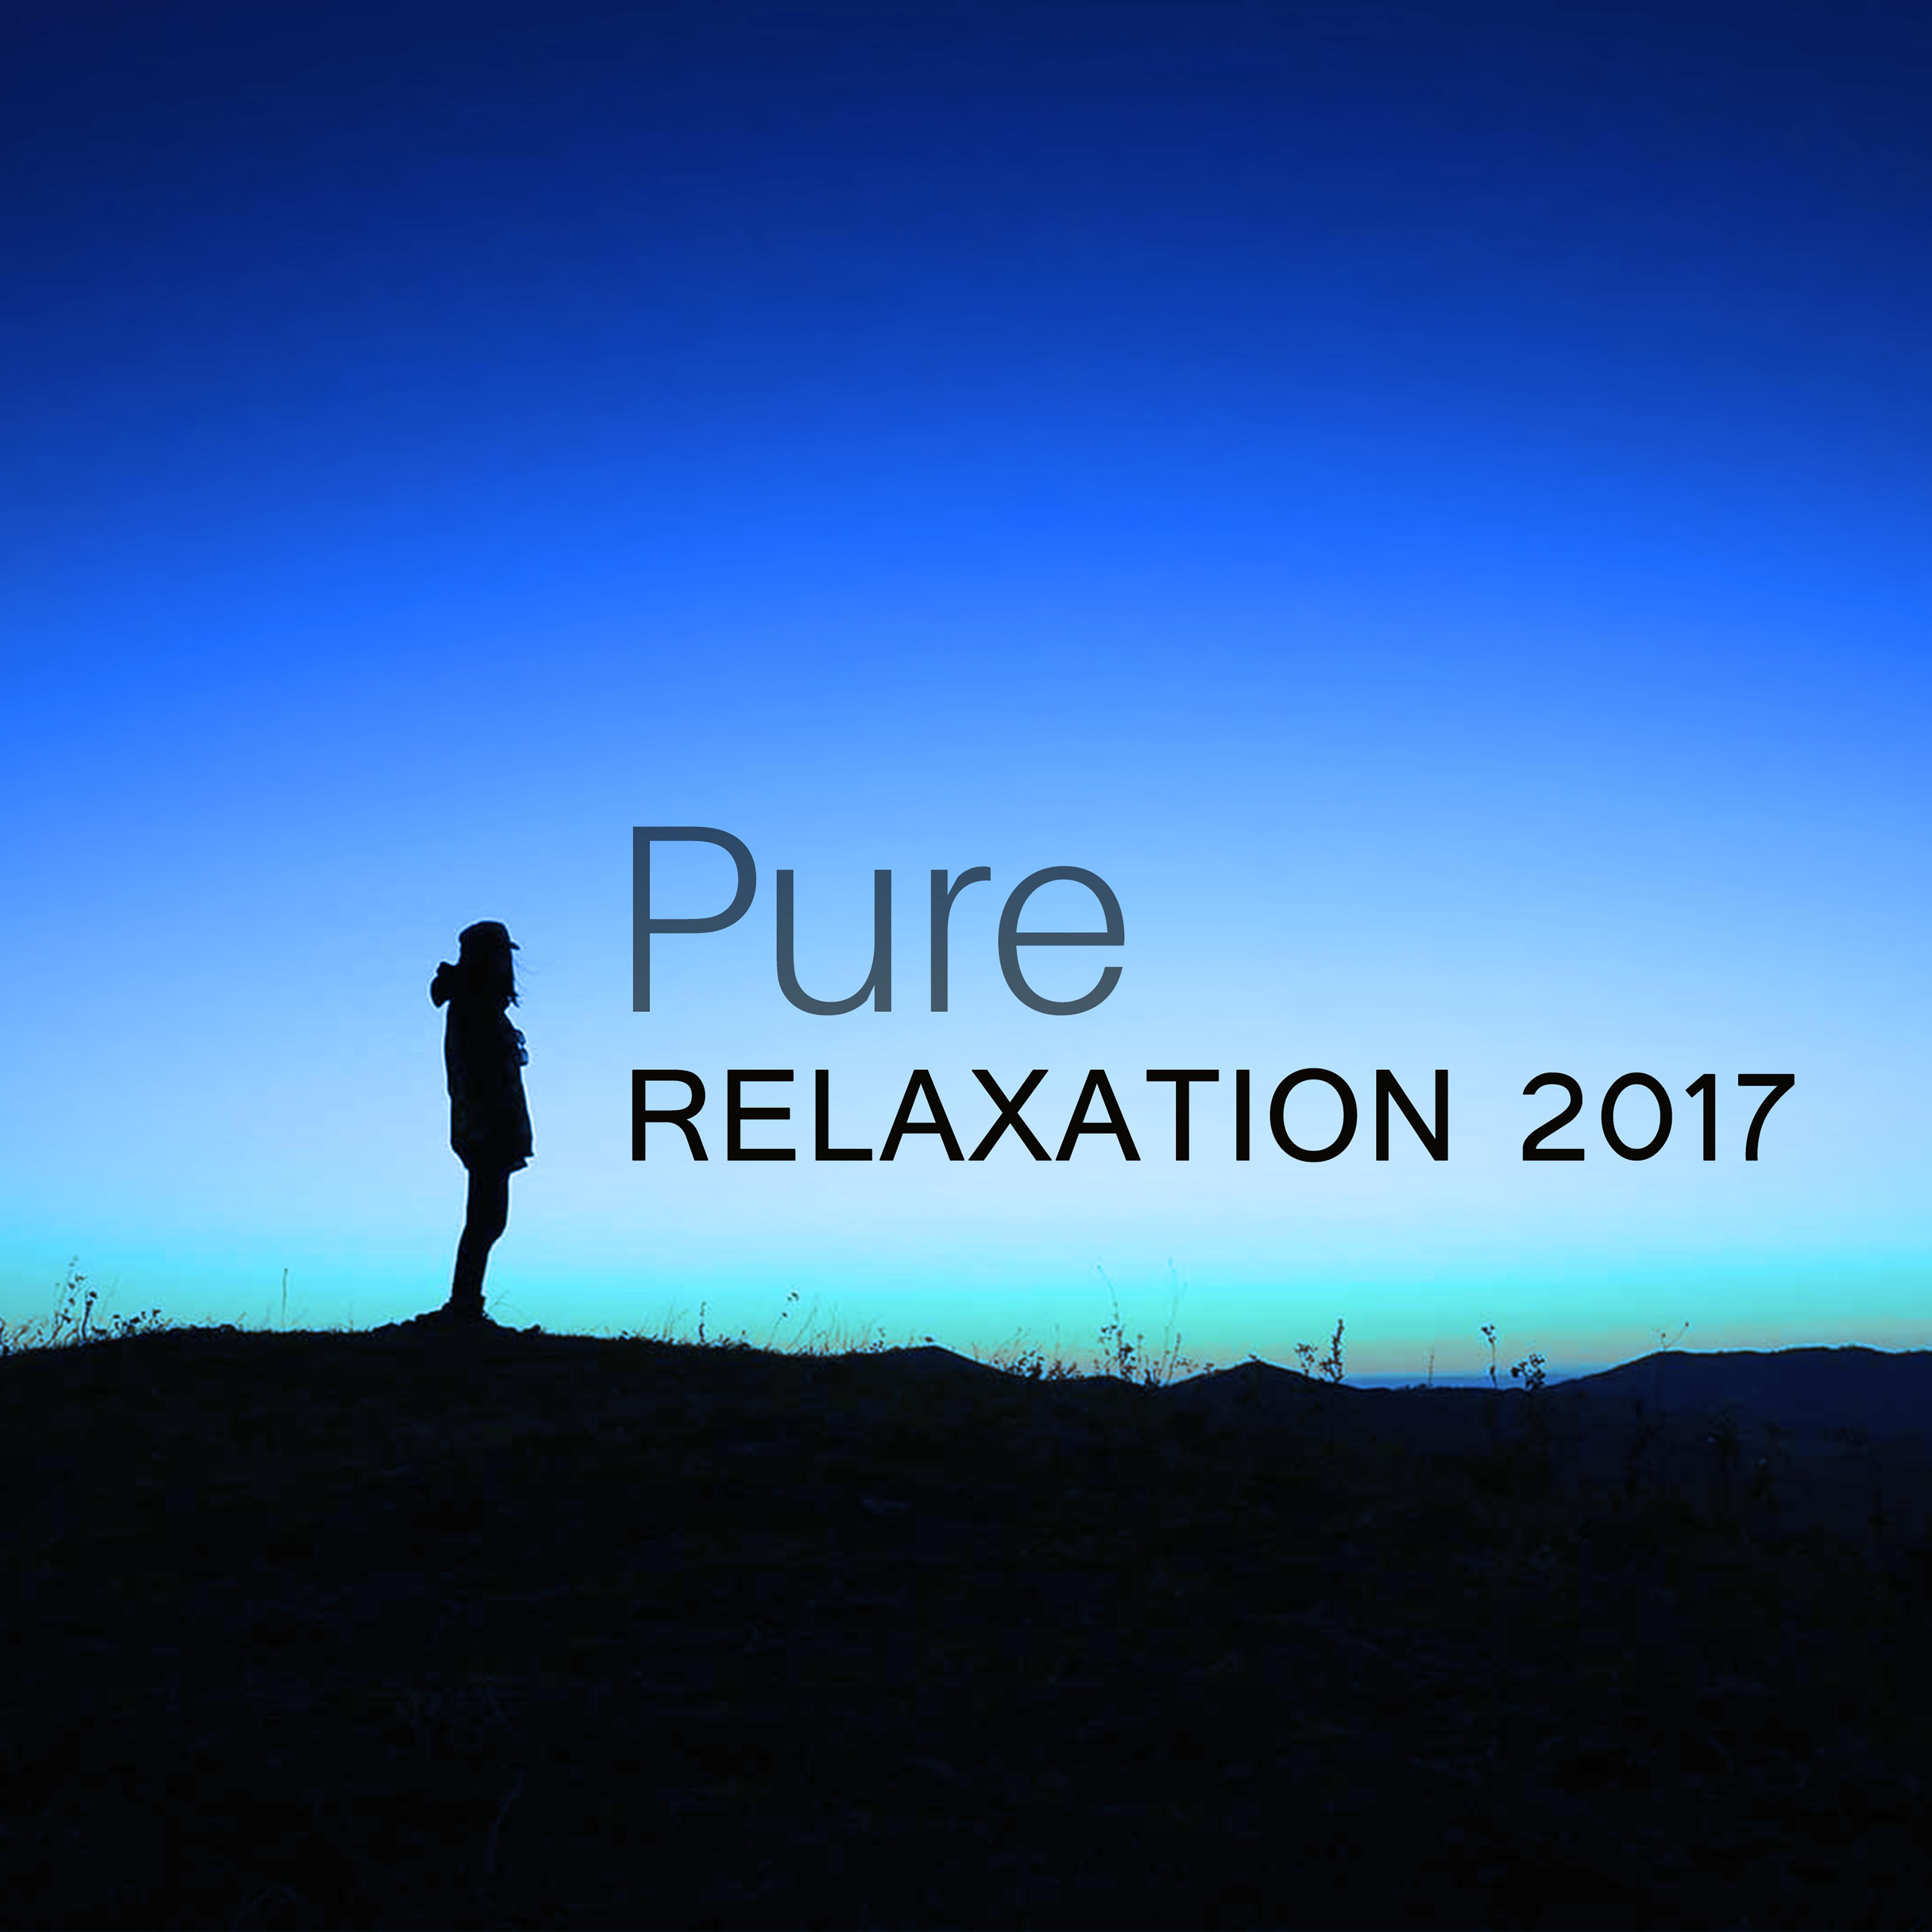 Pure Relaxation 2017  New Age Music, Deep Relaxation, Meditation, Peaceful Sounds of Nature to Calm Down, Relief Stress